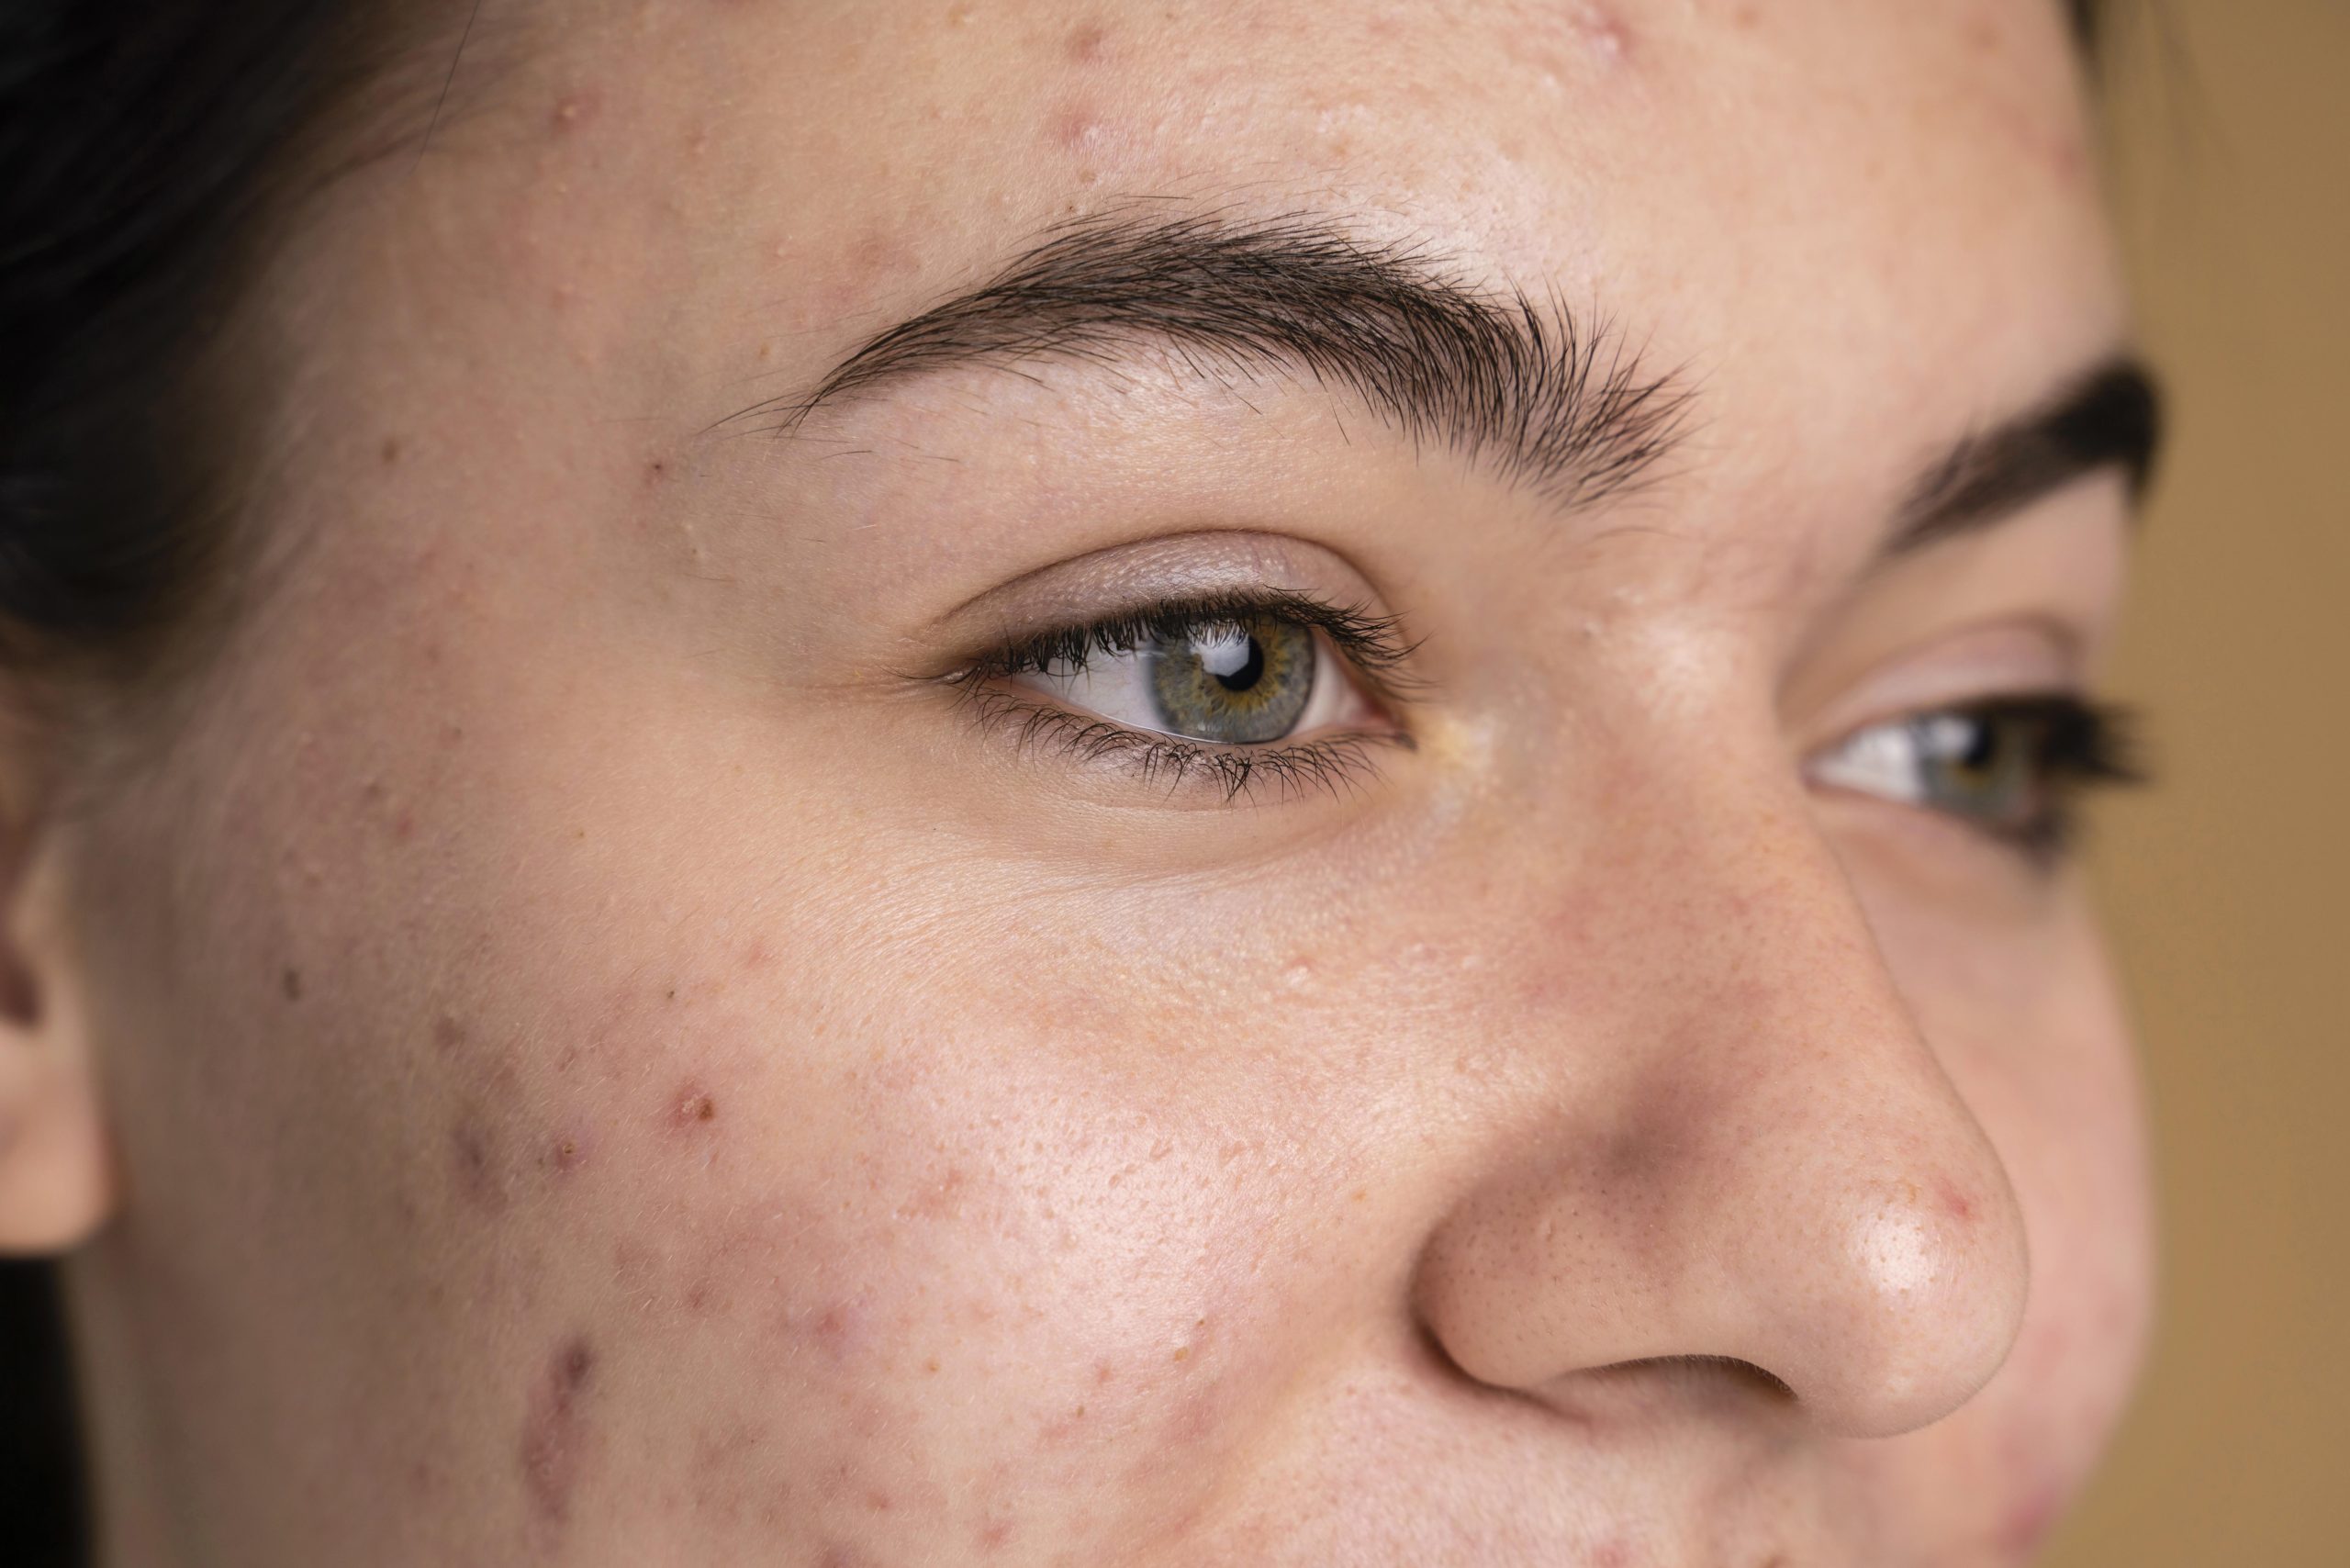 A teenage girl with acne on her cheeks